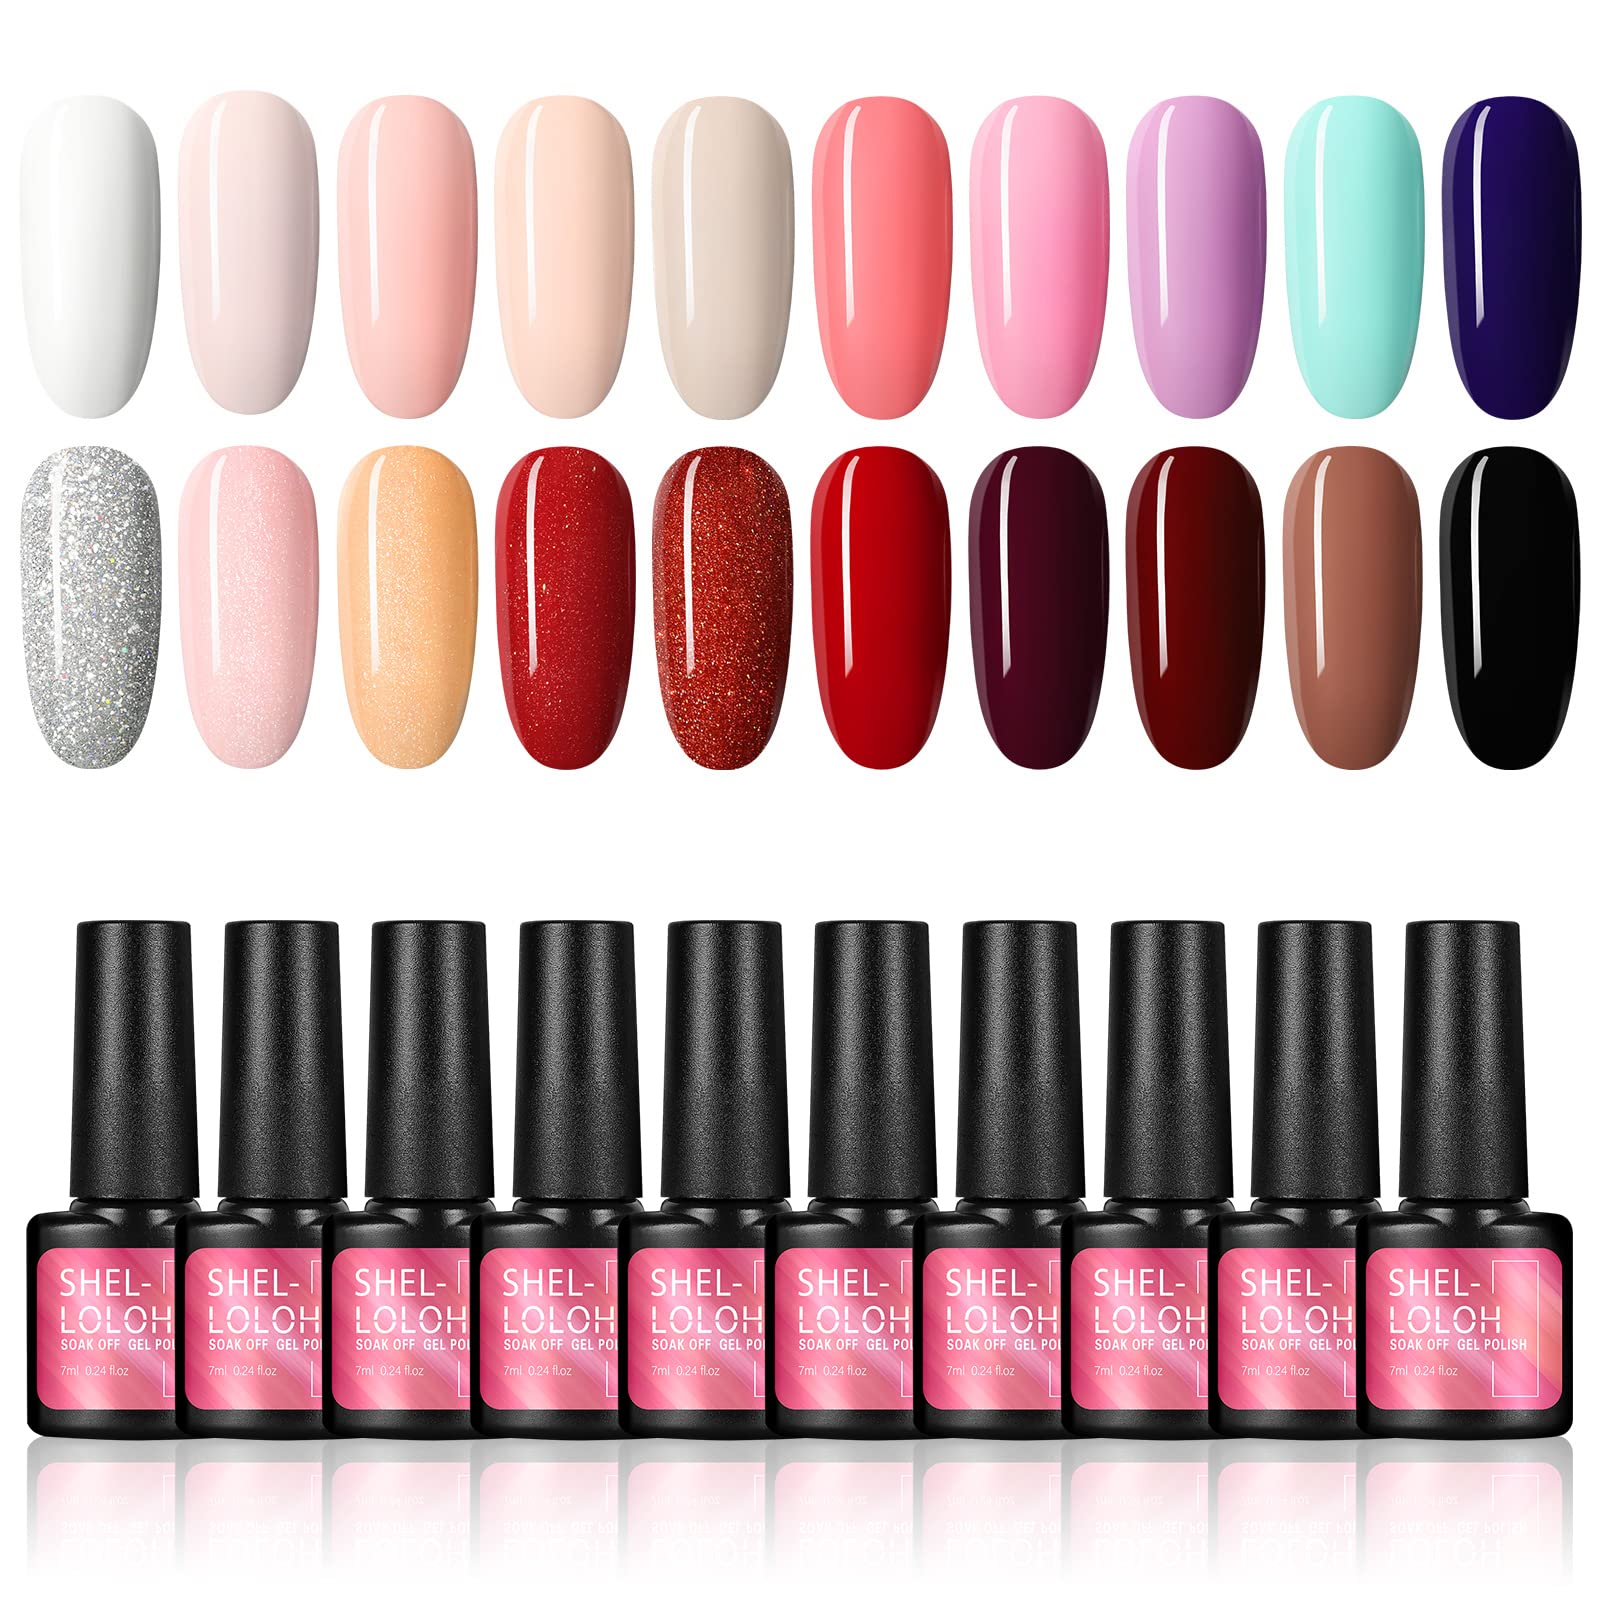 Premium Nail Polish Set - Combo of 8 Velvet Matte Nail Paint - Turquoise,  Red, Black, Yellow, Peach, Maroon, Brown, Pink - 12 ml each bottle (MM# 16- 20)